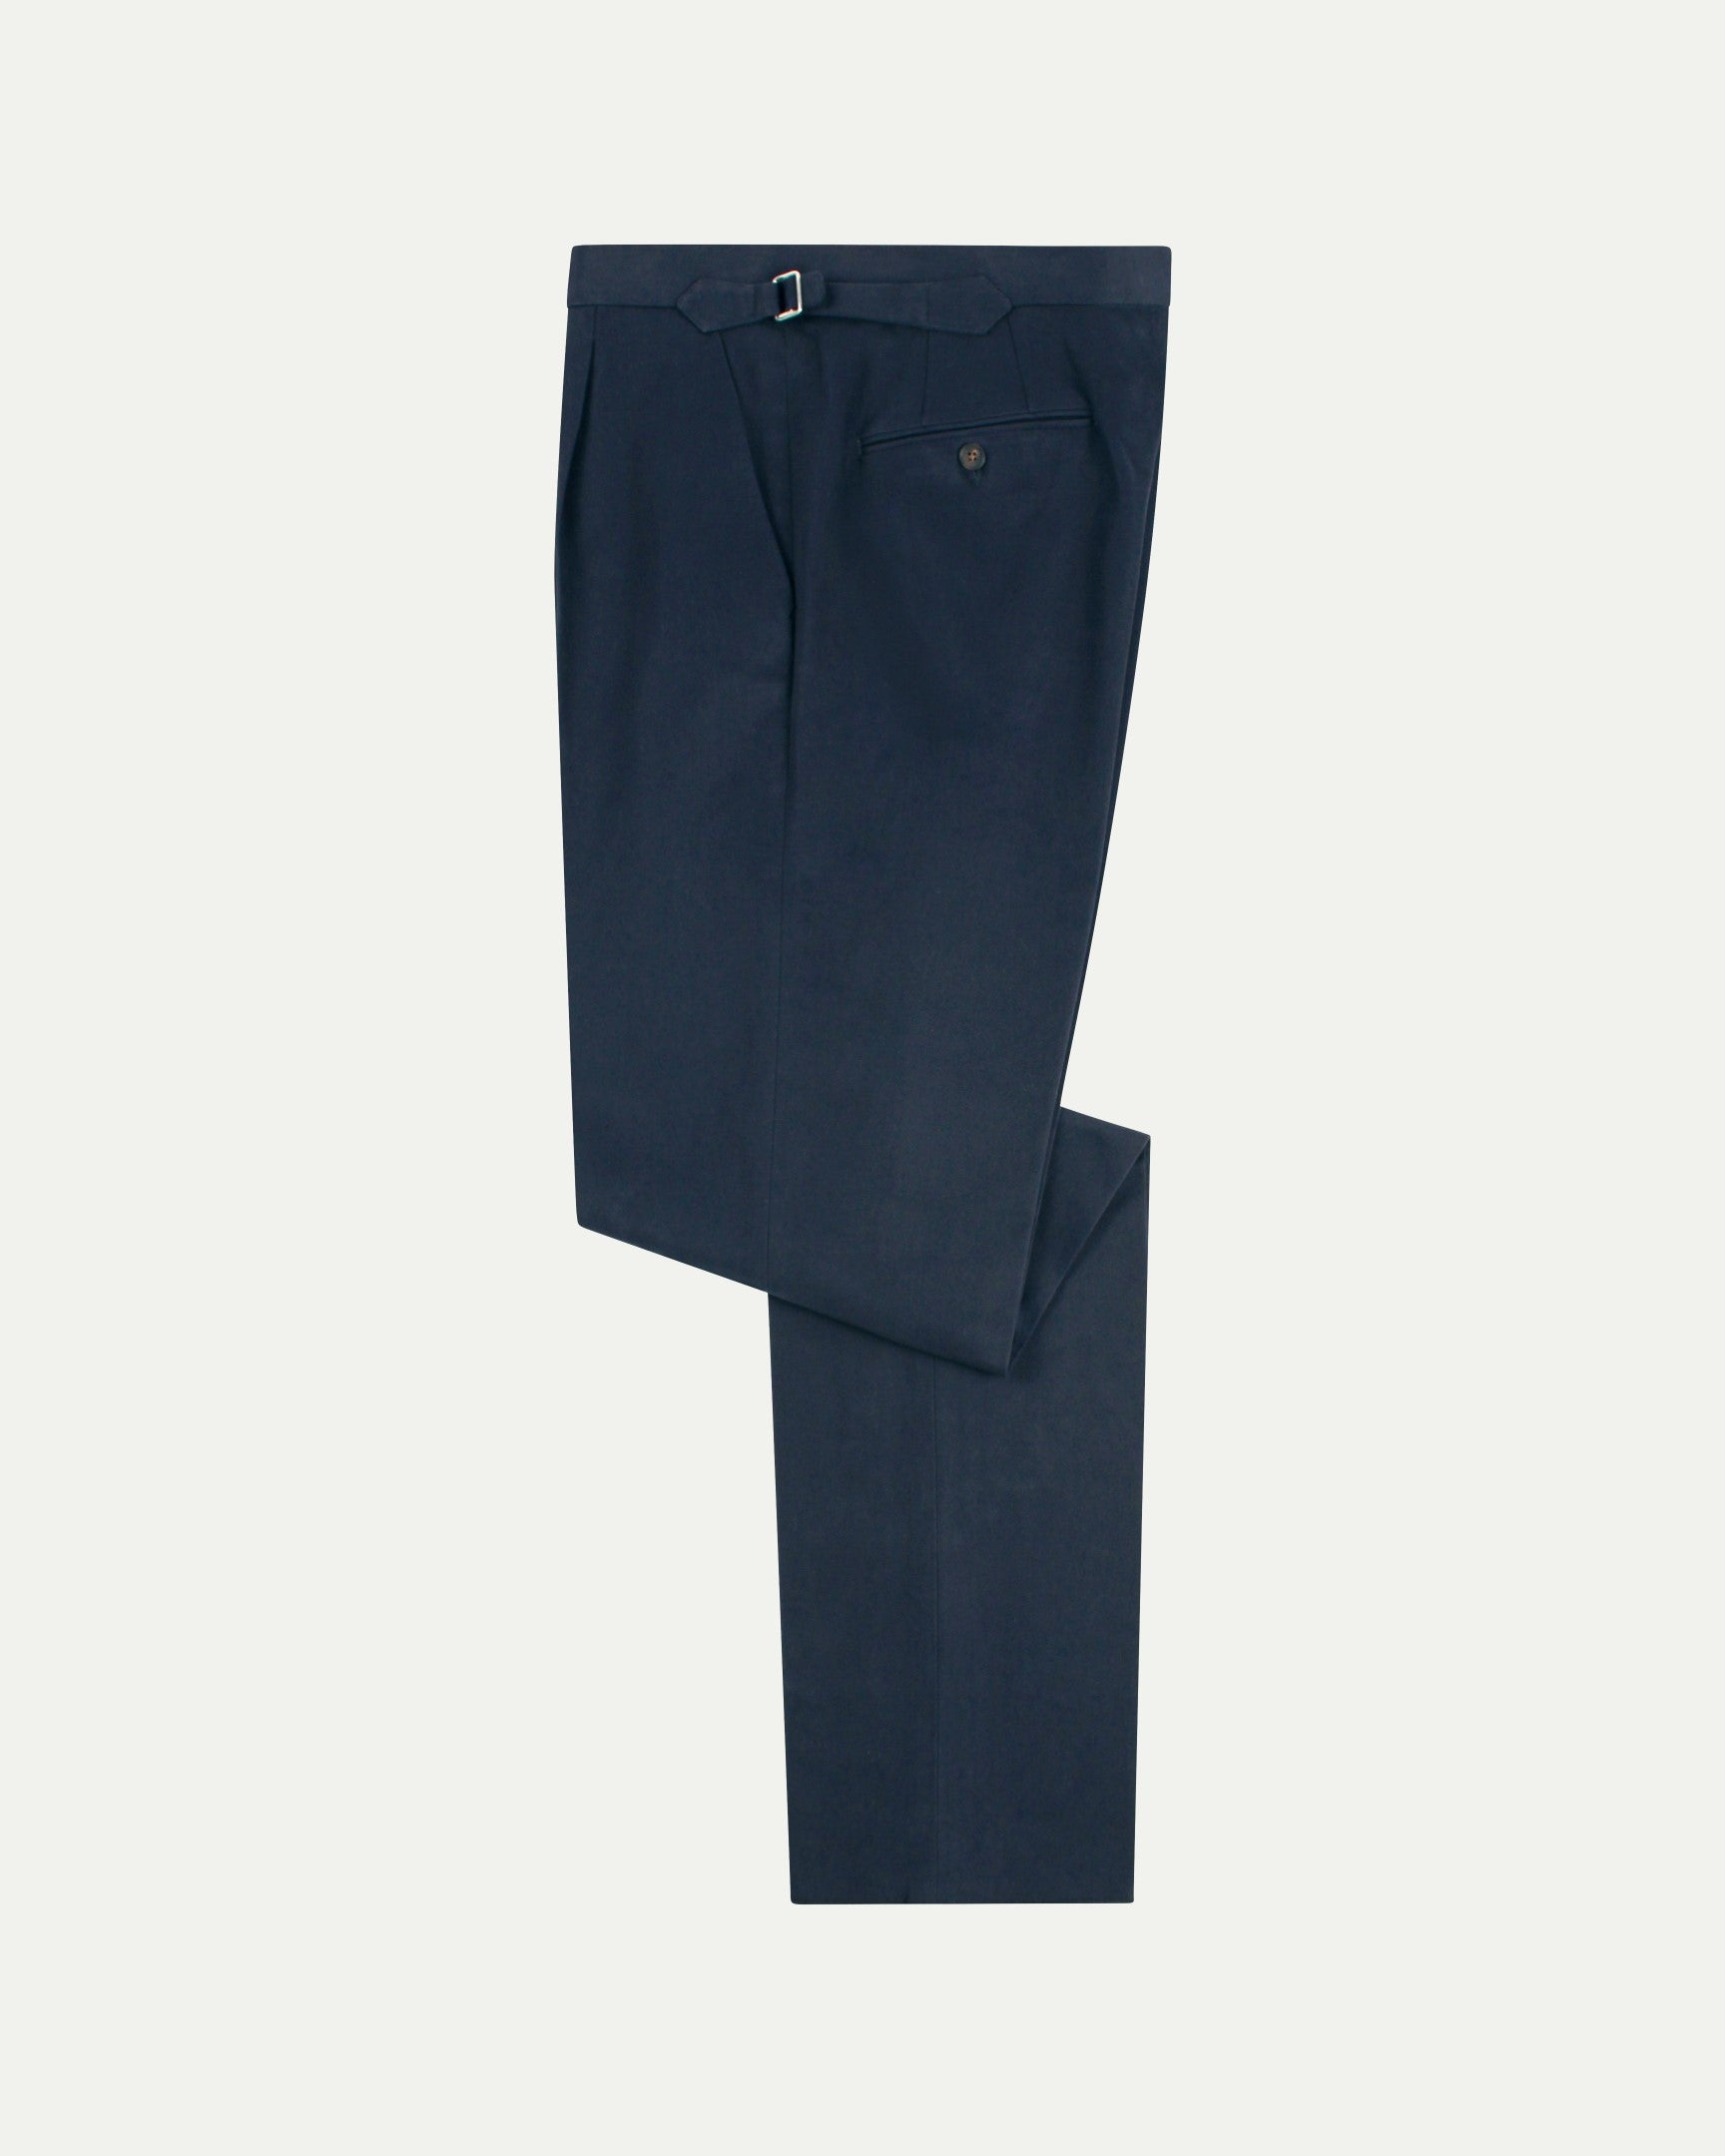 Made-To-Order Trousers in Dark Blue Cotton Drill